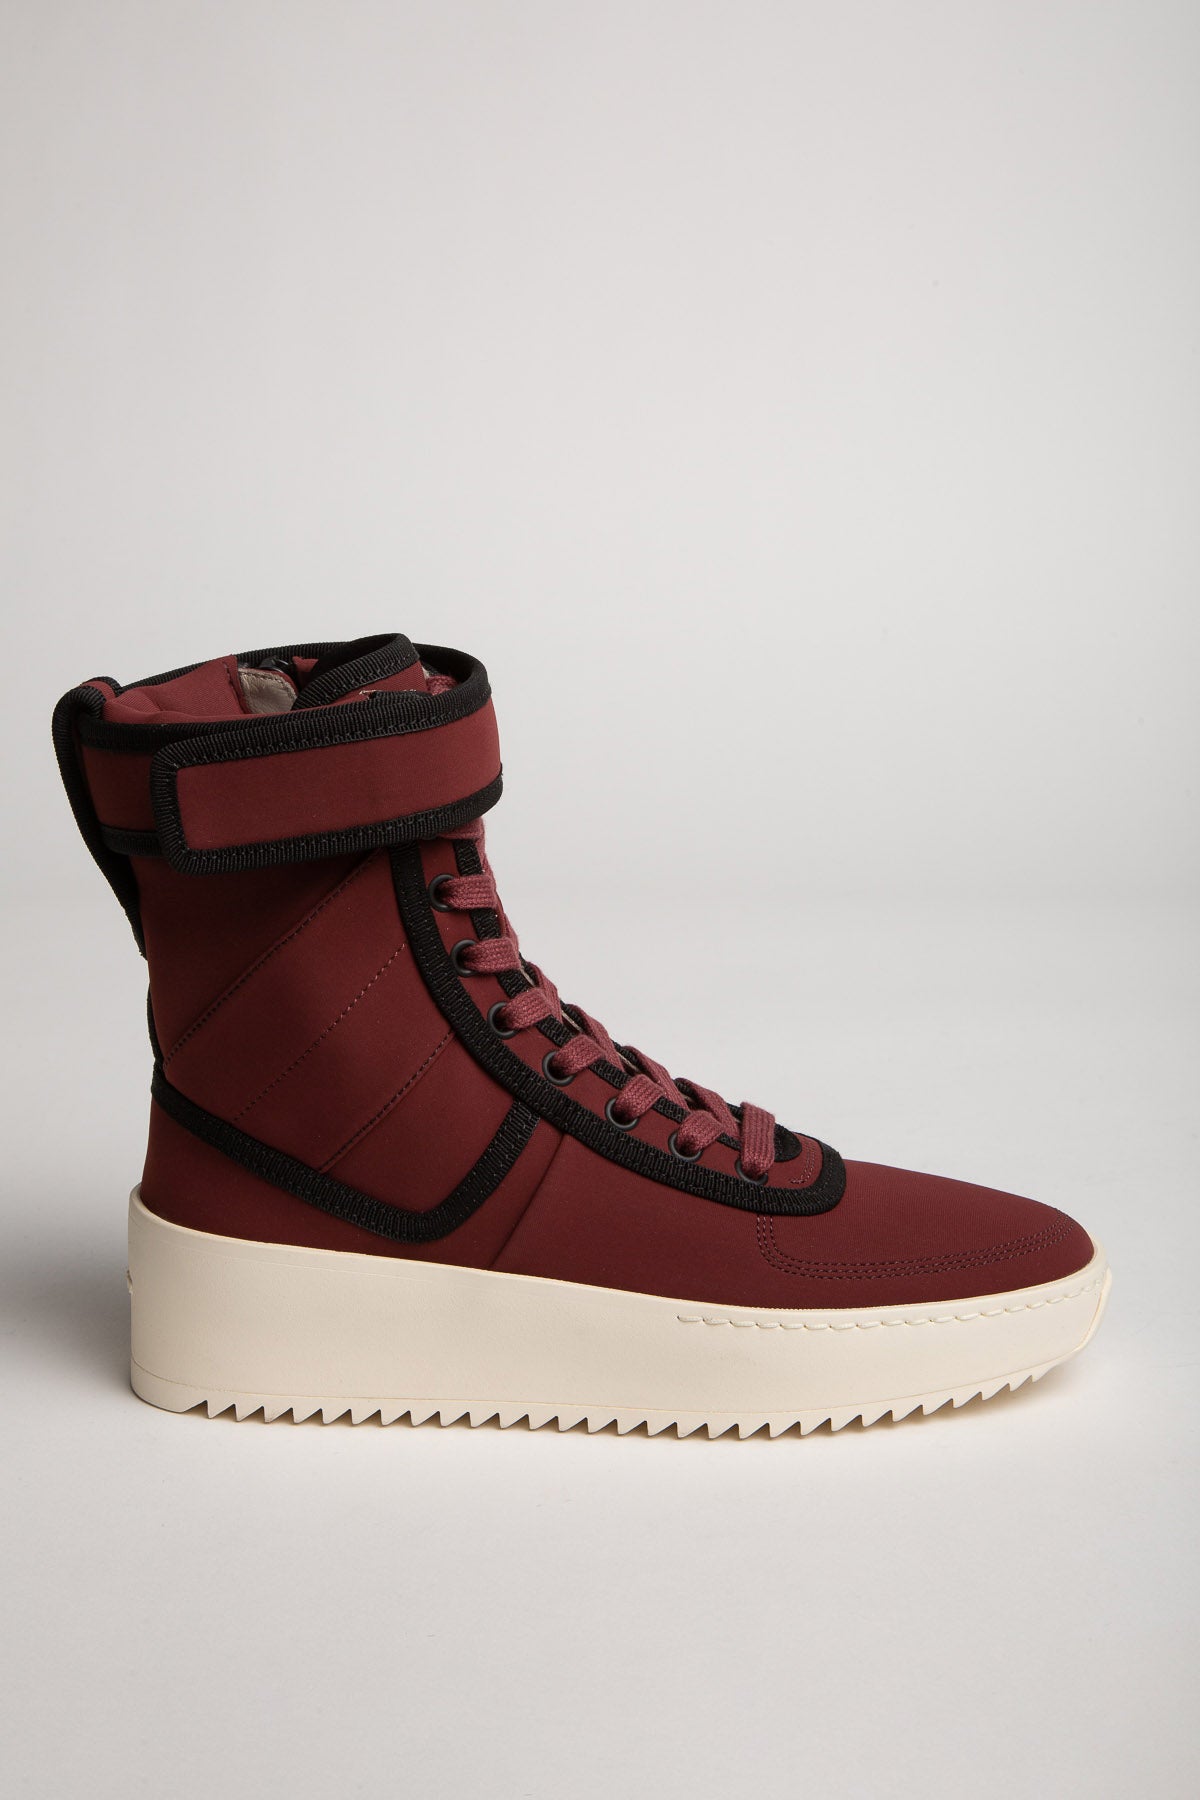 FEAR OF GOD | MILITARY SNEAKERS